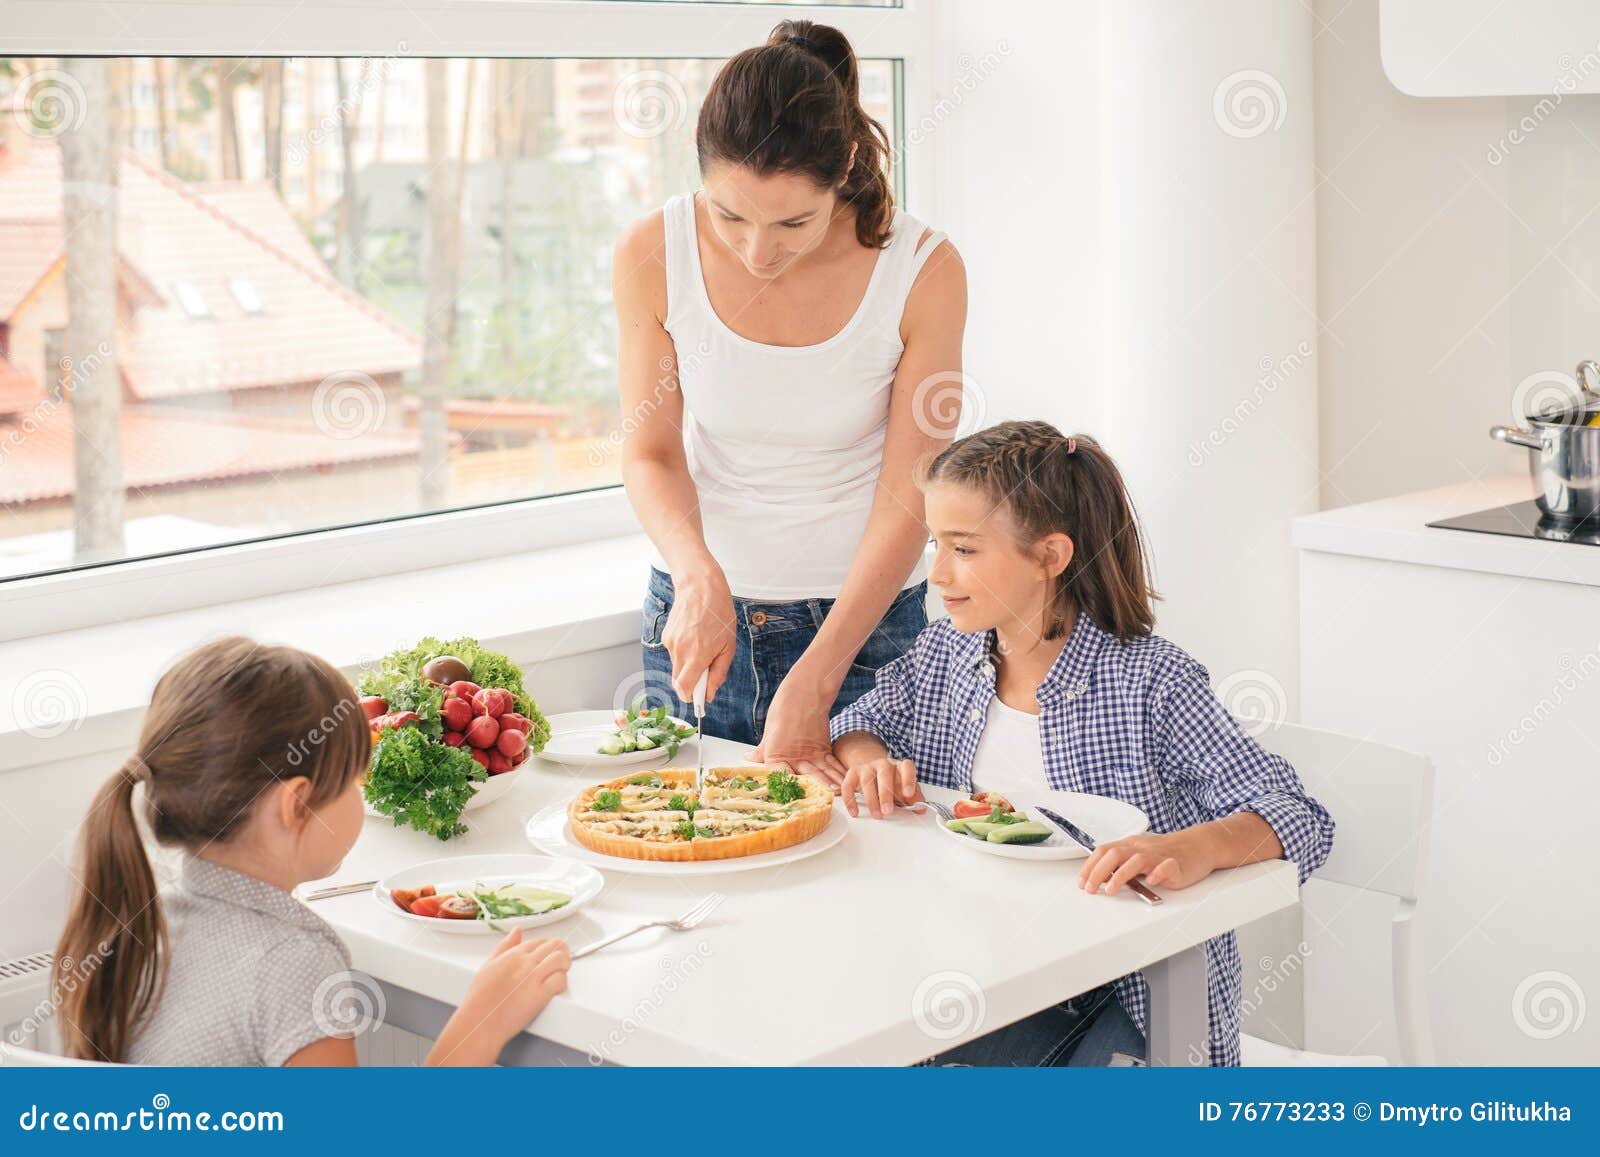 Mother Cooking Healthy Meal For Children Stock Image - Image of food